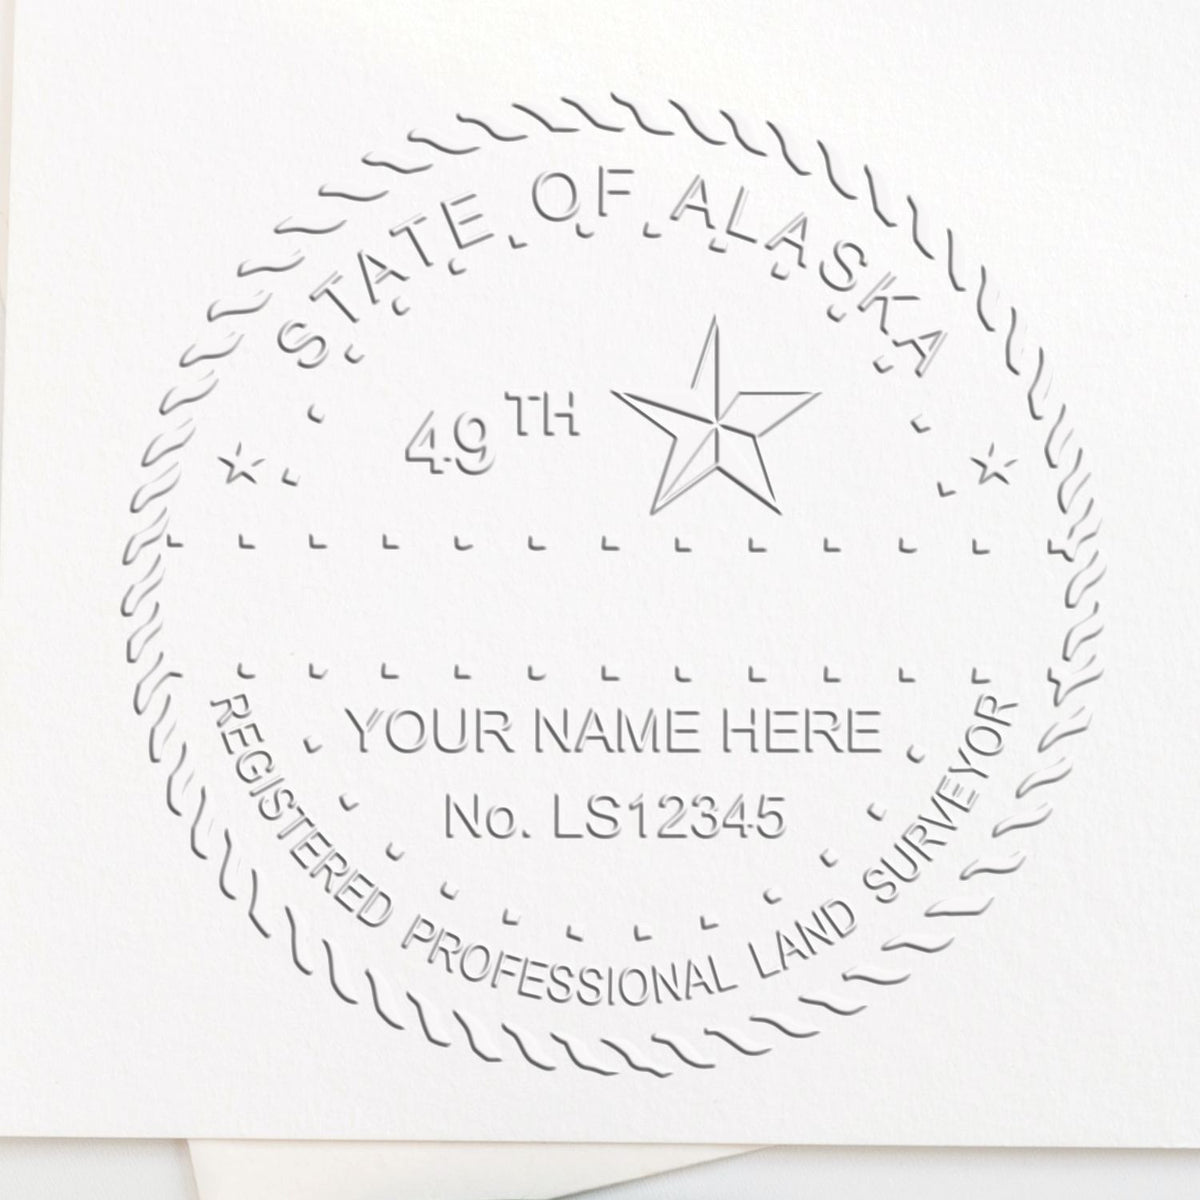 A lifestyle photo showing a stamped image of the Alaska Desk Surveyor Seal Embosser on a piece of paper